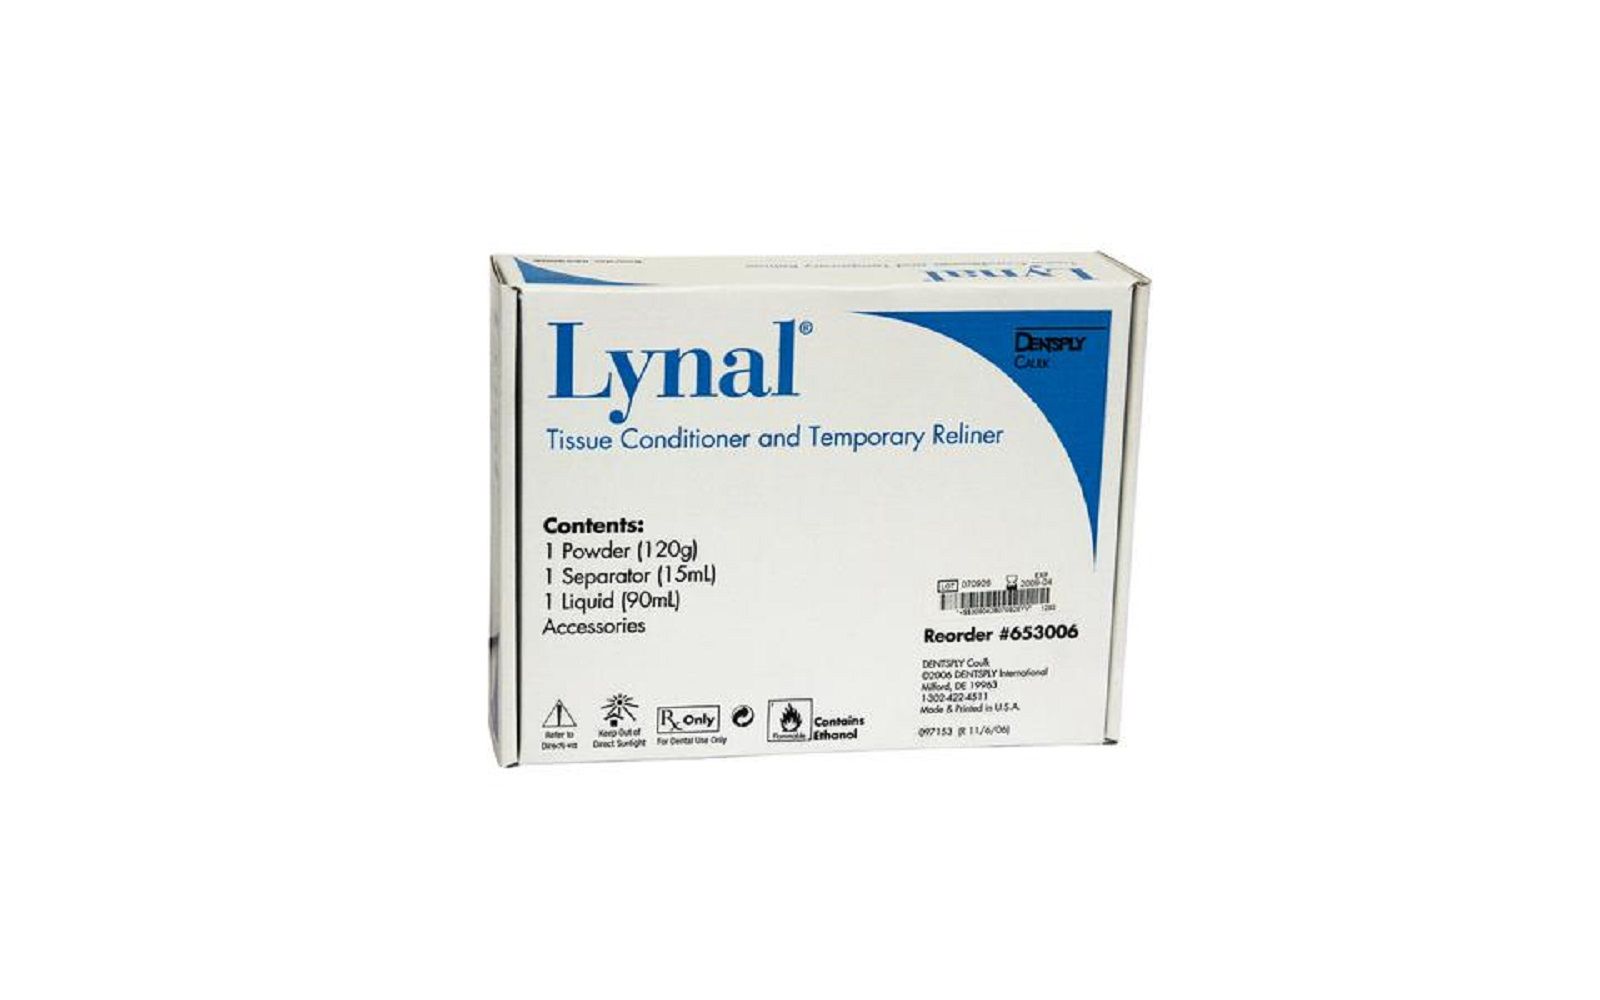 Lynal® tissue conditioner and temporary reliner kit